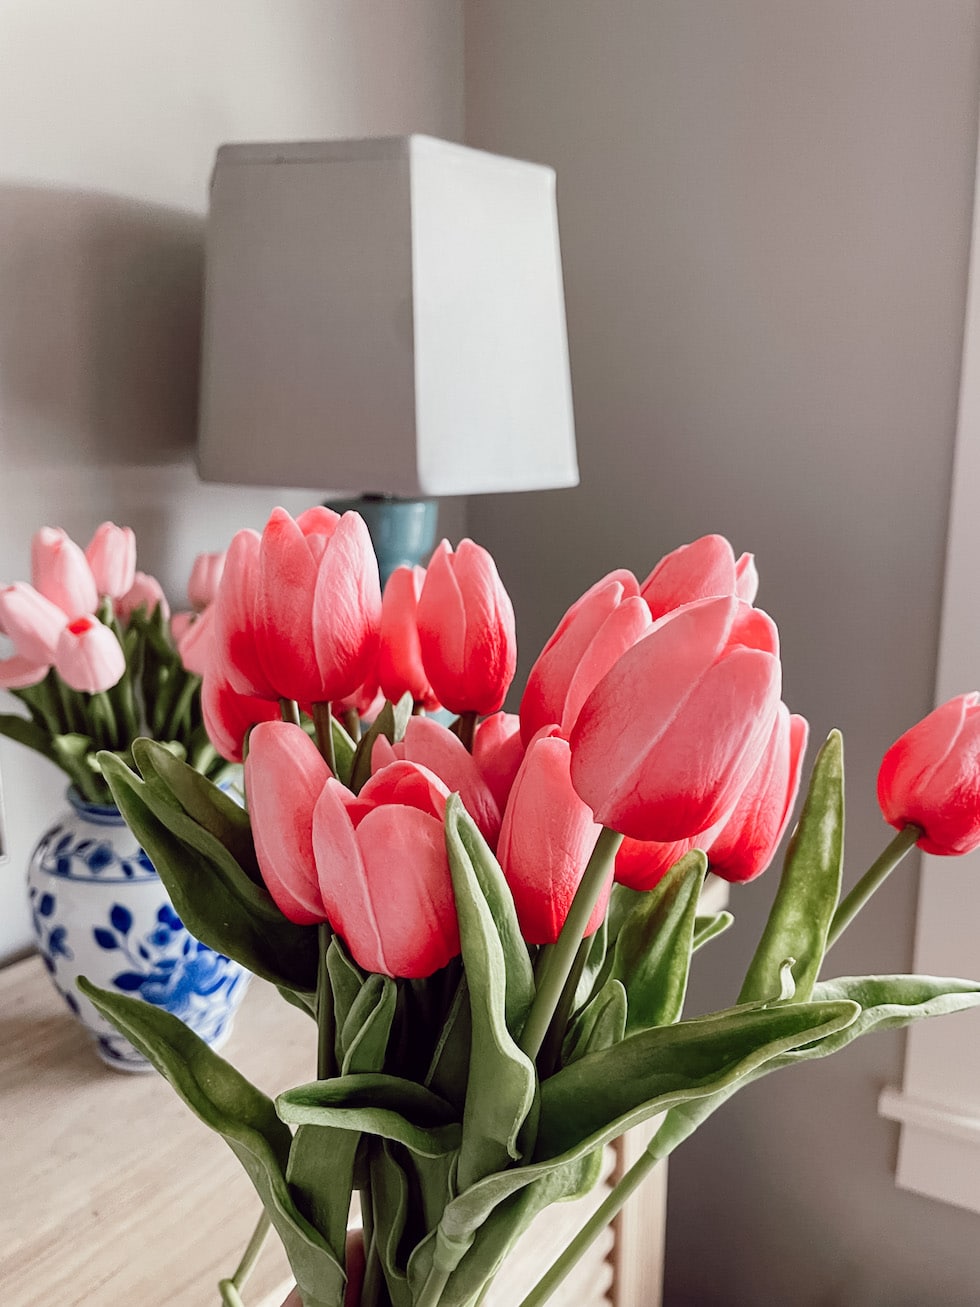 Realistic Faux/Artificial Tulips - Simple Spring Decorating